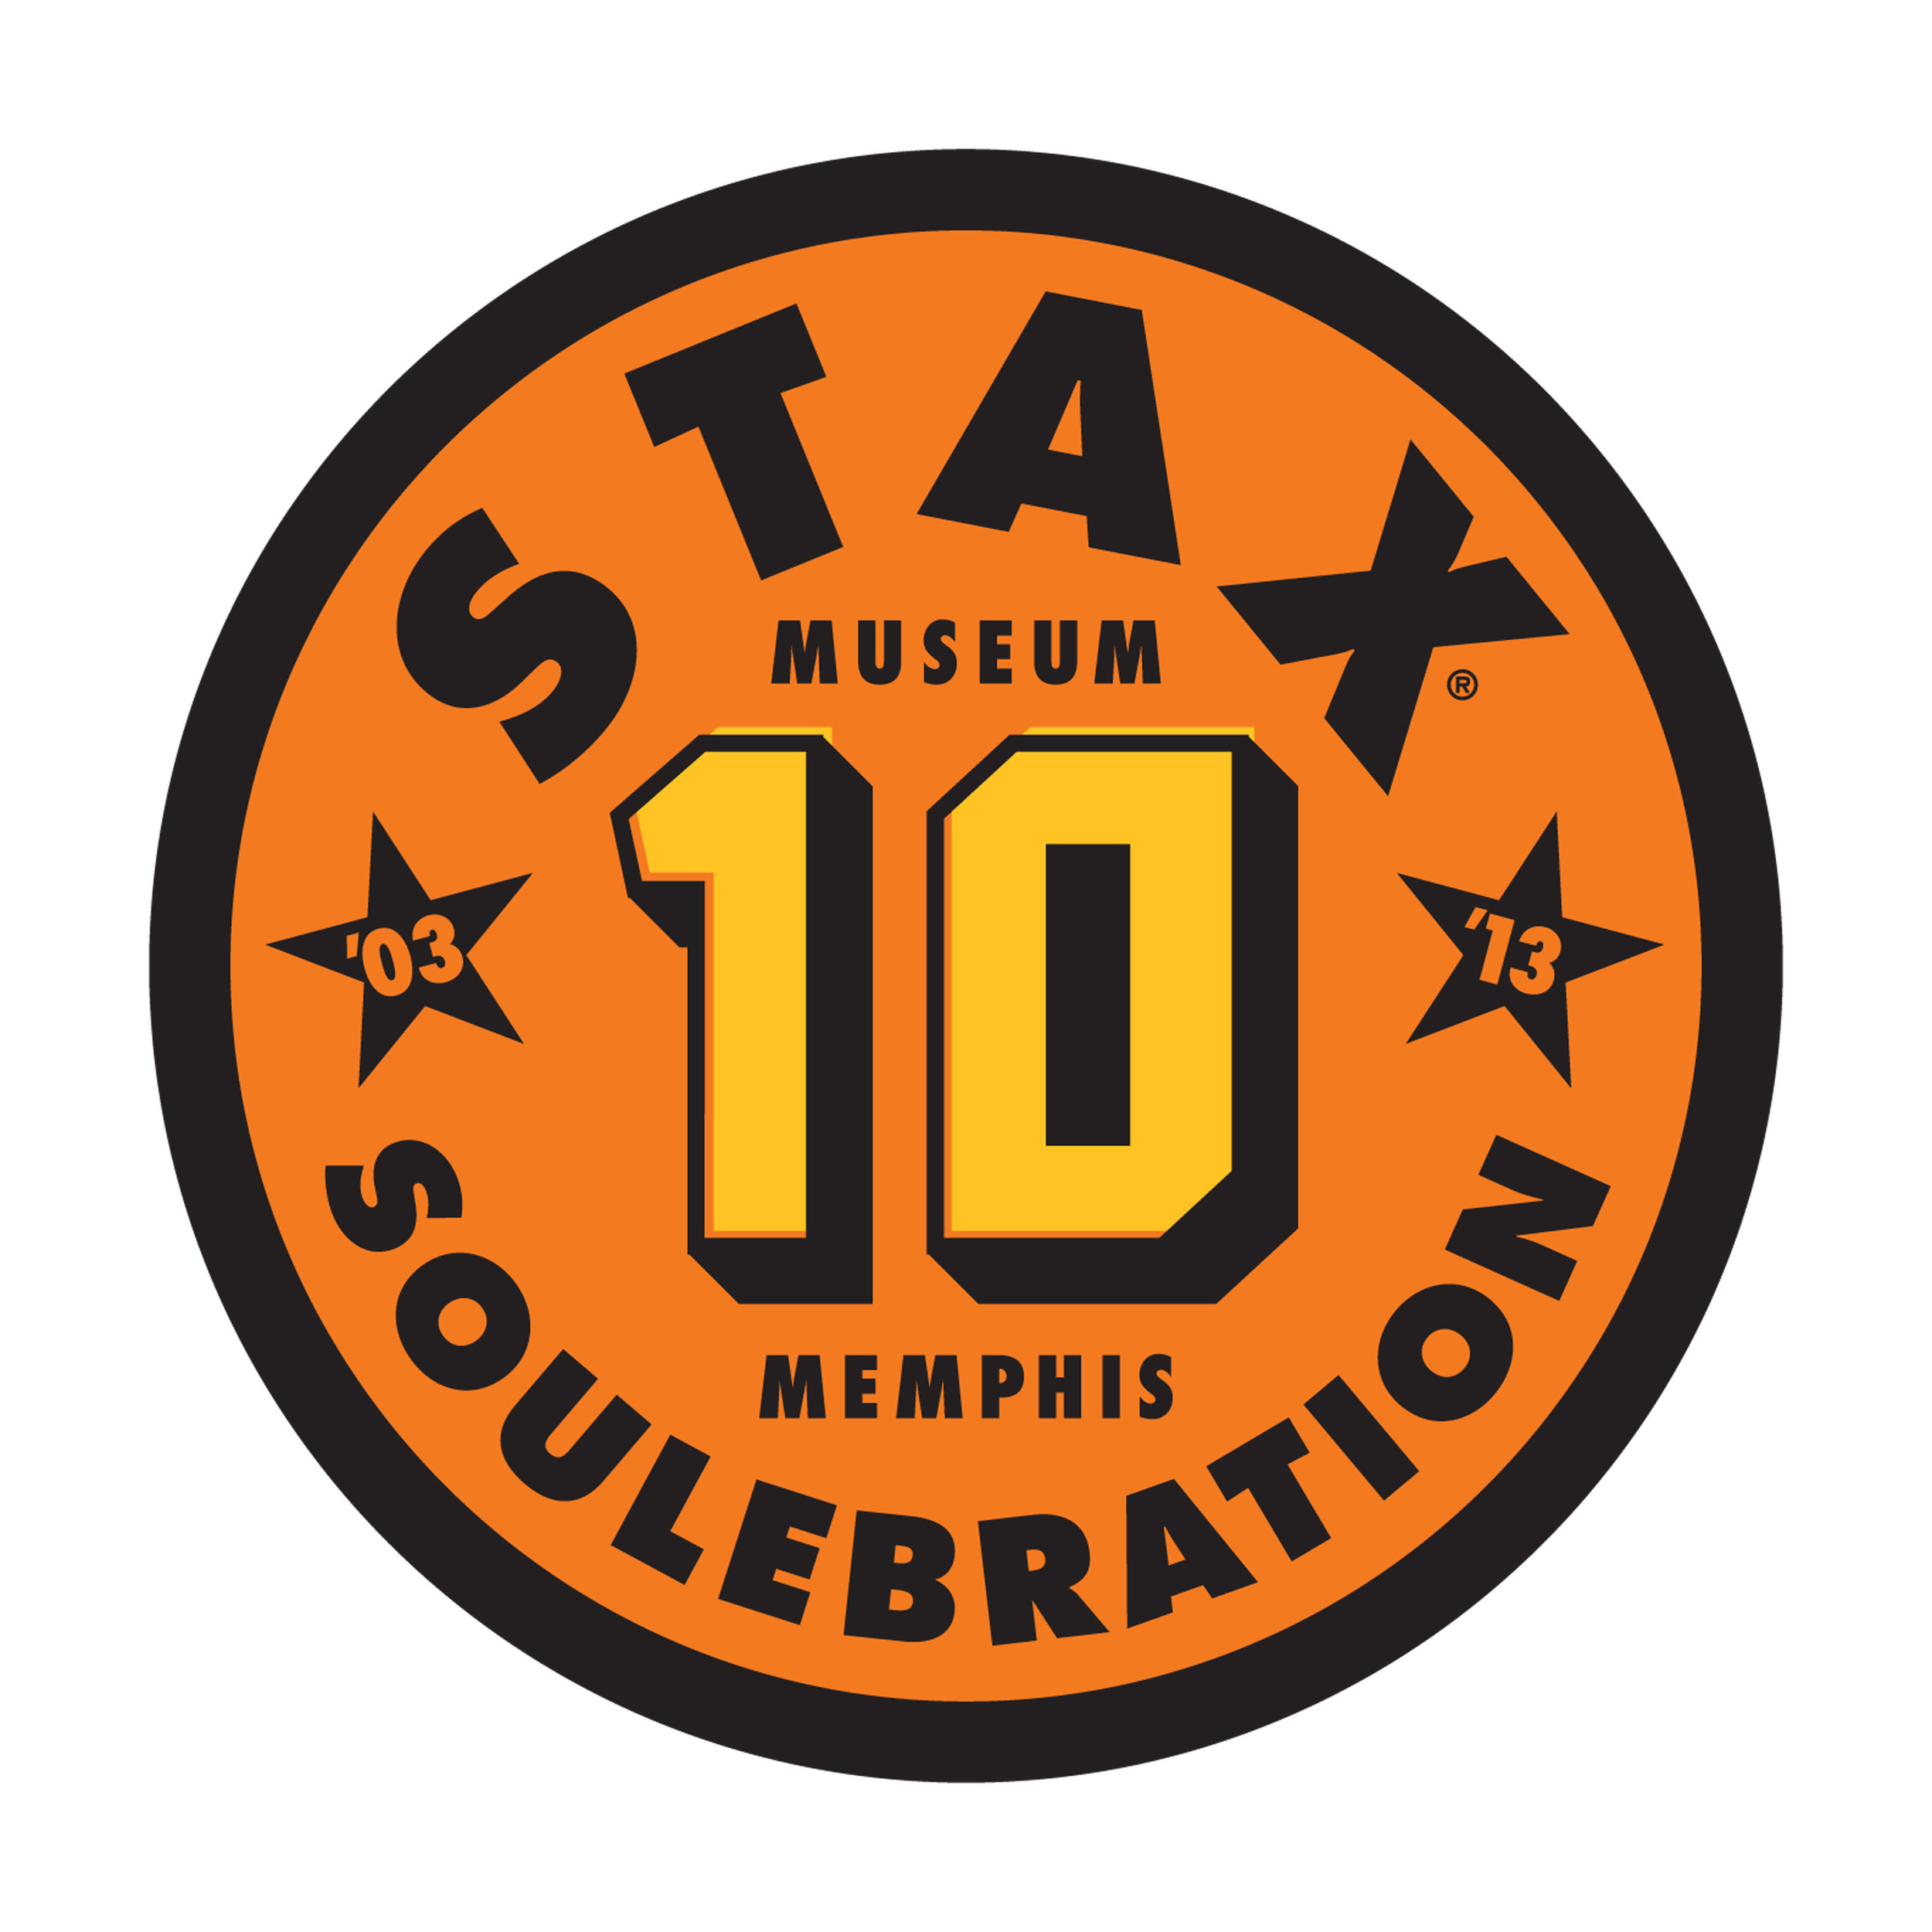  STAX 1 0 Soulebration logo  branding creative, design and event naming by Chuck Mitchell 